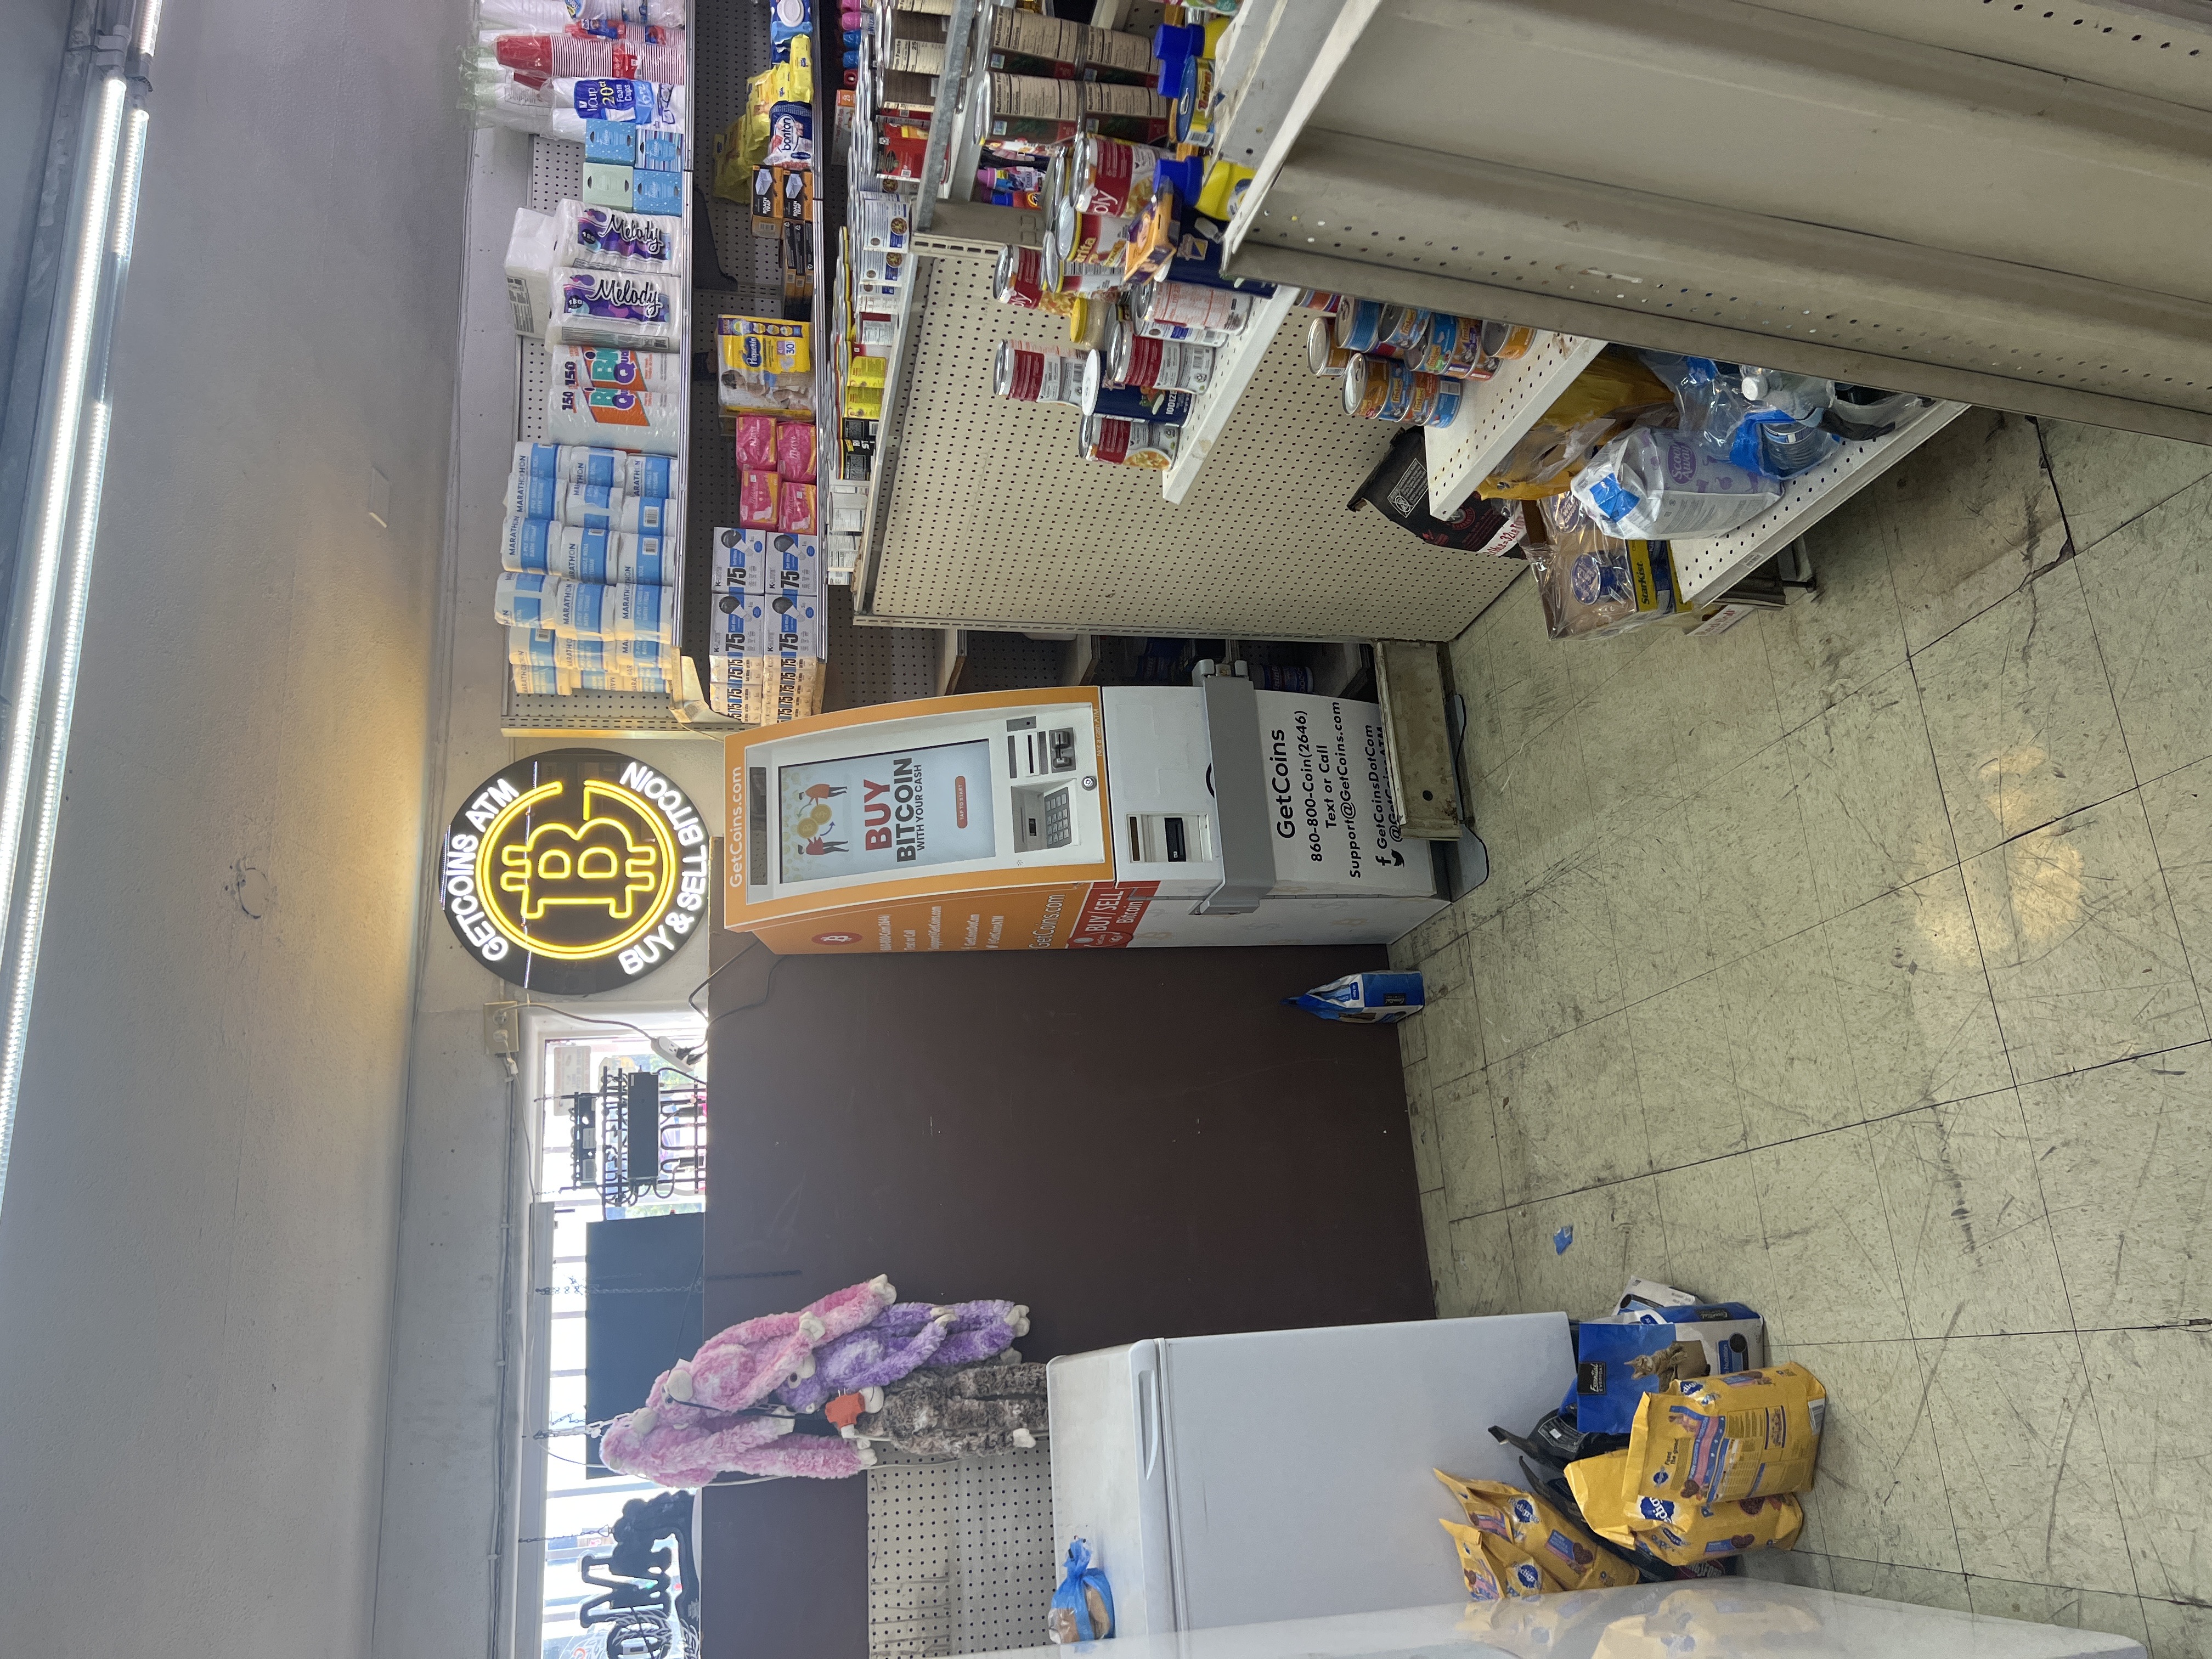 Getcoins - Bitcoin ATM - Inside of Palm's Liquor Store in Bakersfield, California